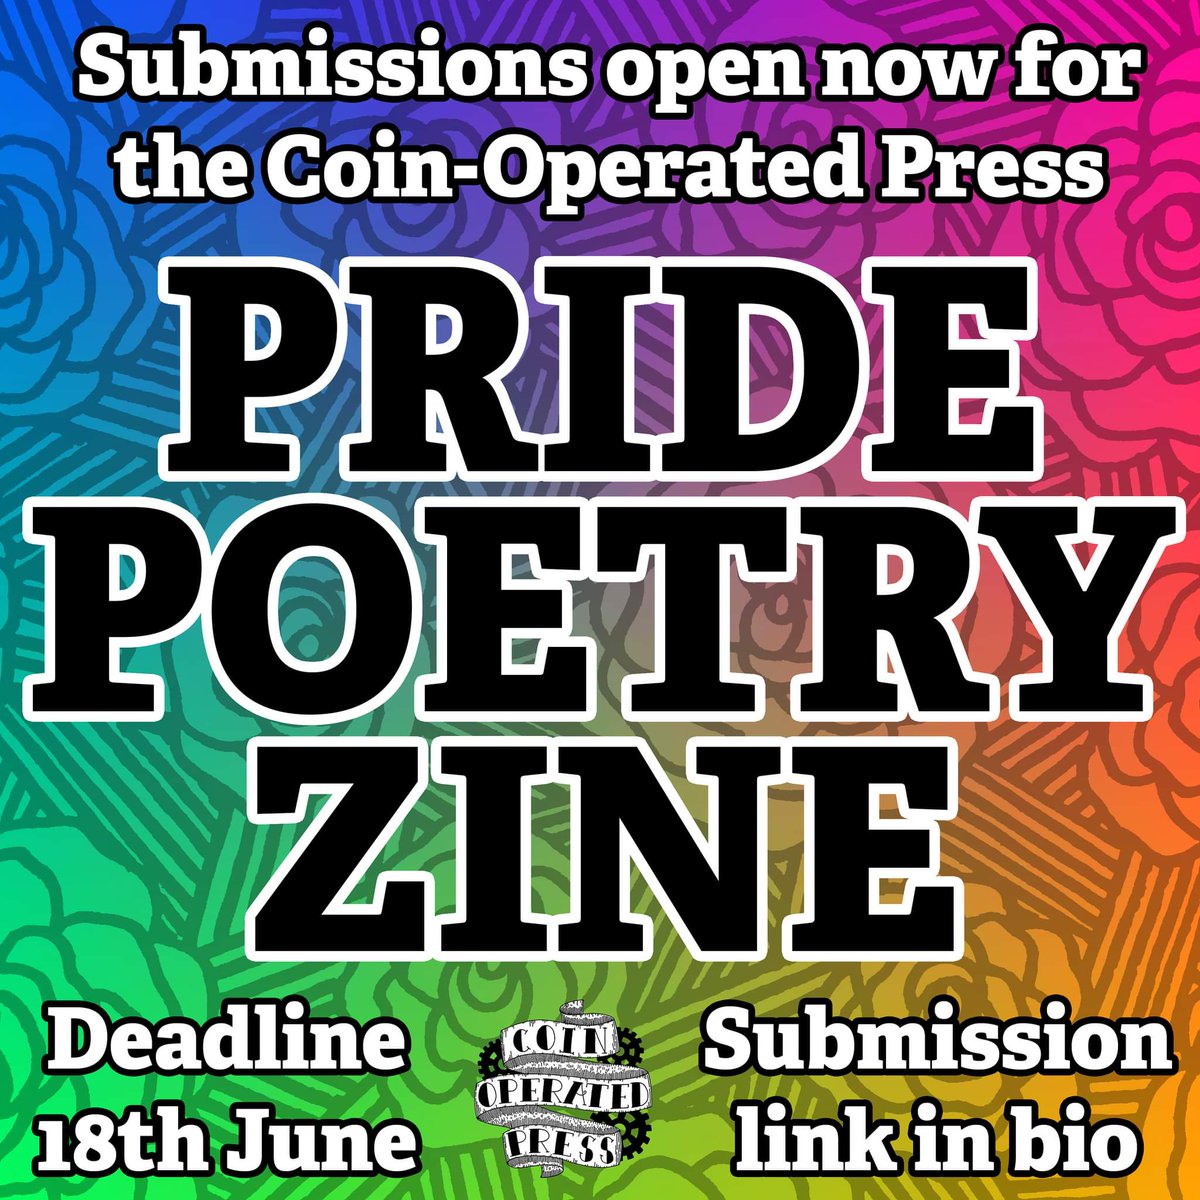 Applications are now open for our poetry zine in celebration of Pride Month 2021! Send us your submissions by filling in this Google form: forms.gle/72YodE77jdHh2i… The deadline is midnight BST on Friday 18th June 2021 🏳️‍🌈🏳️‍🌈🏳️‍🌈